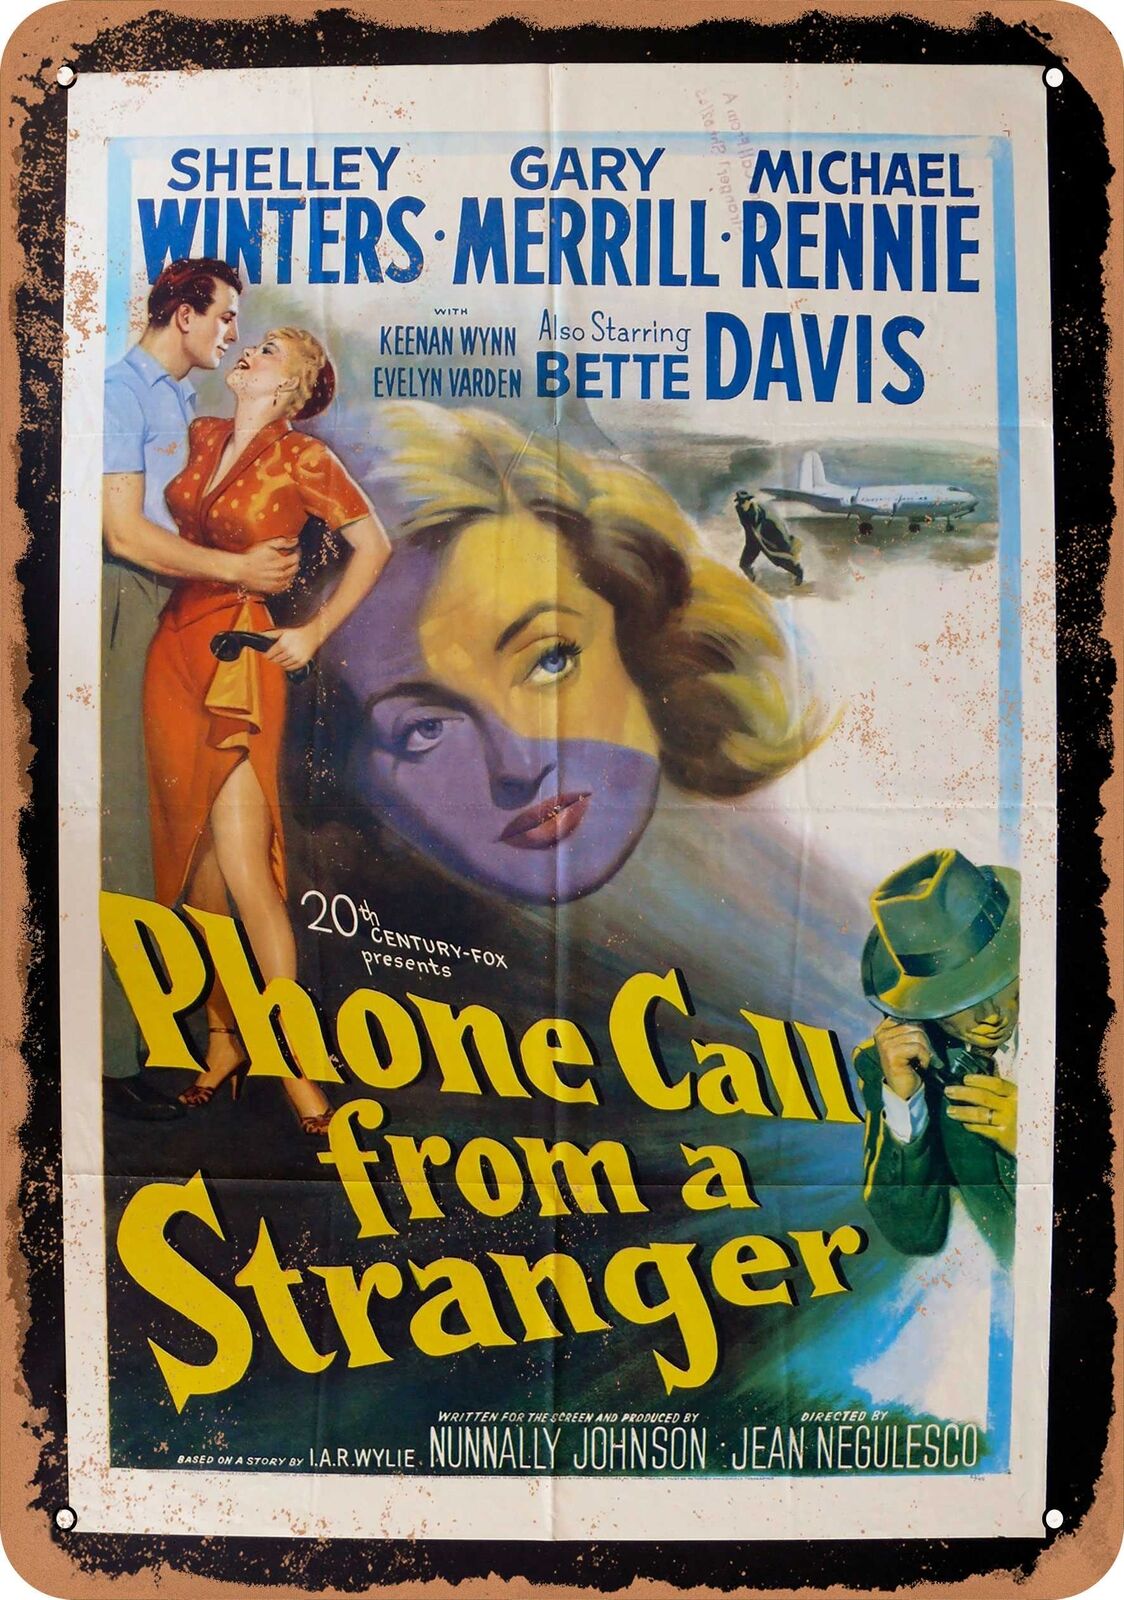 Metal Sign - Phone Call From a Stranger (1952) - Vintage Look